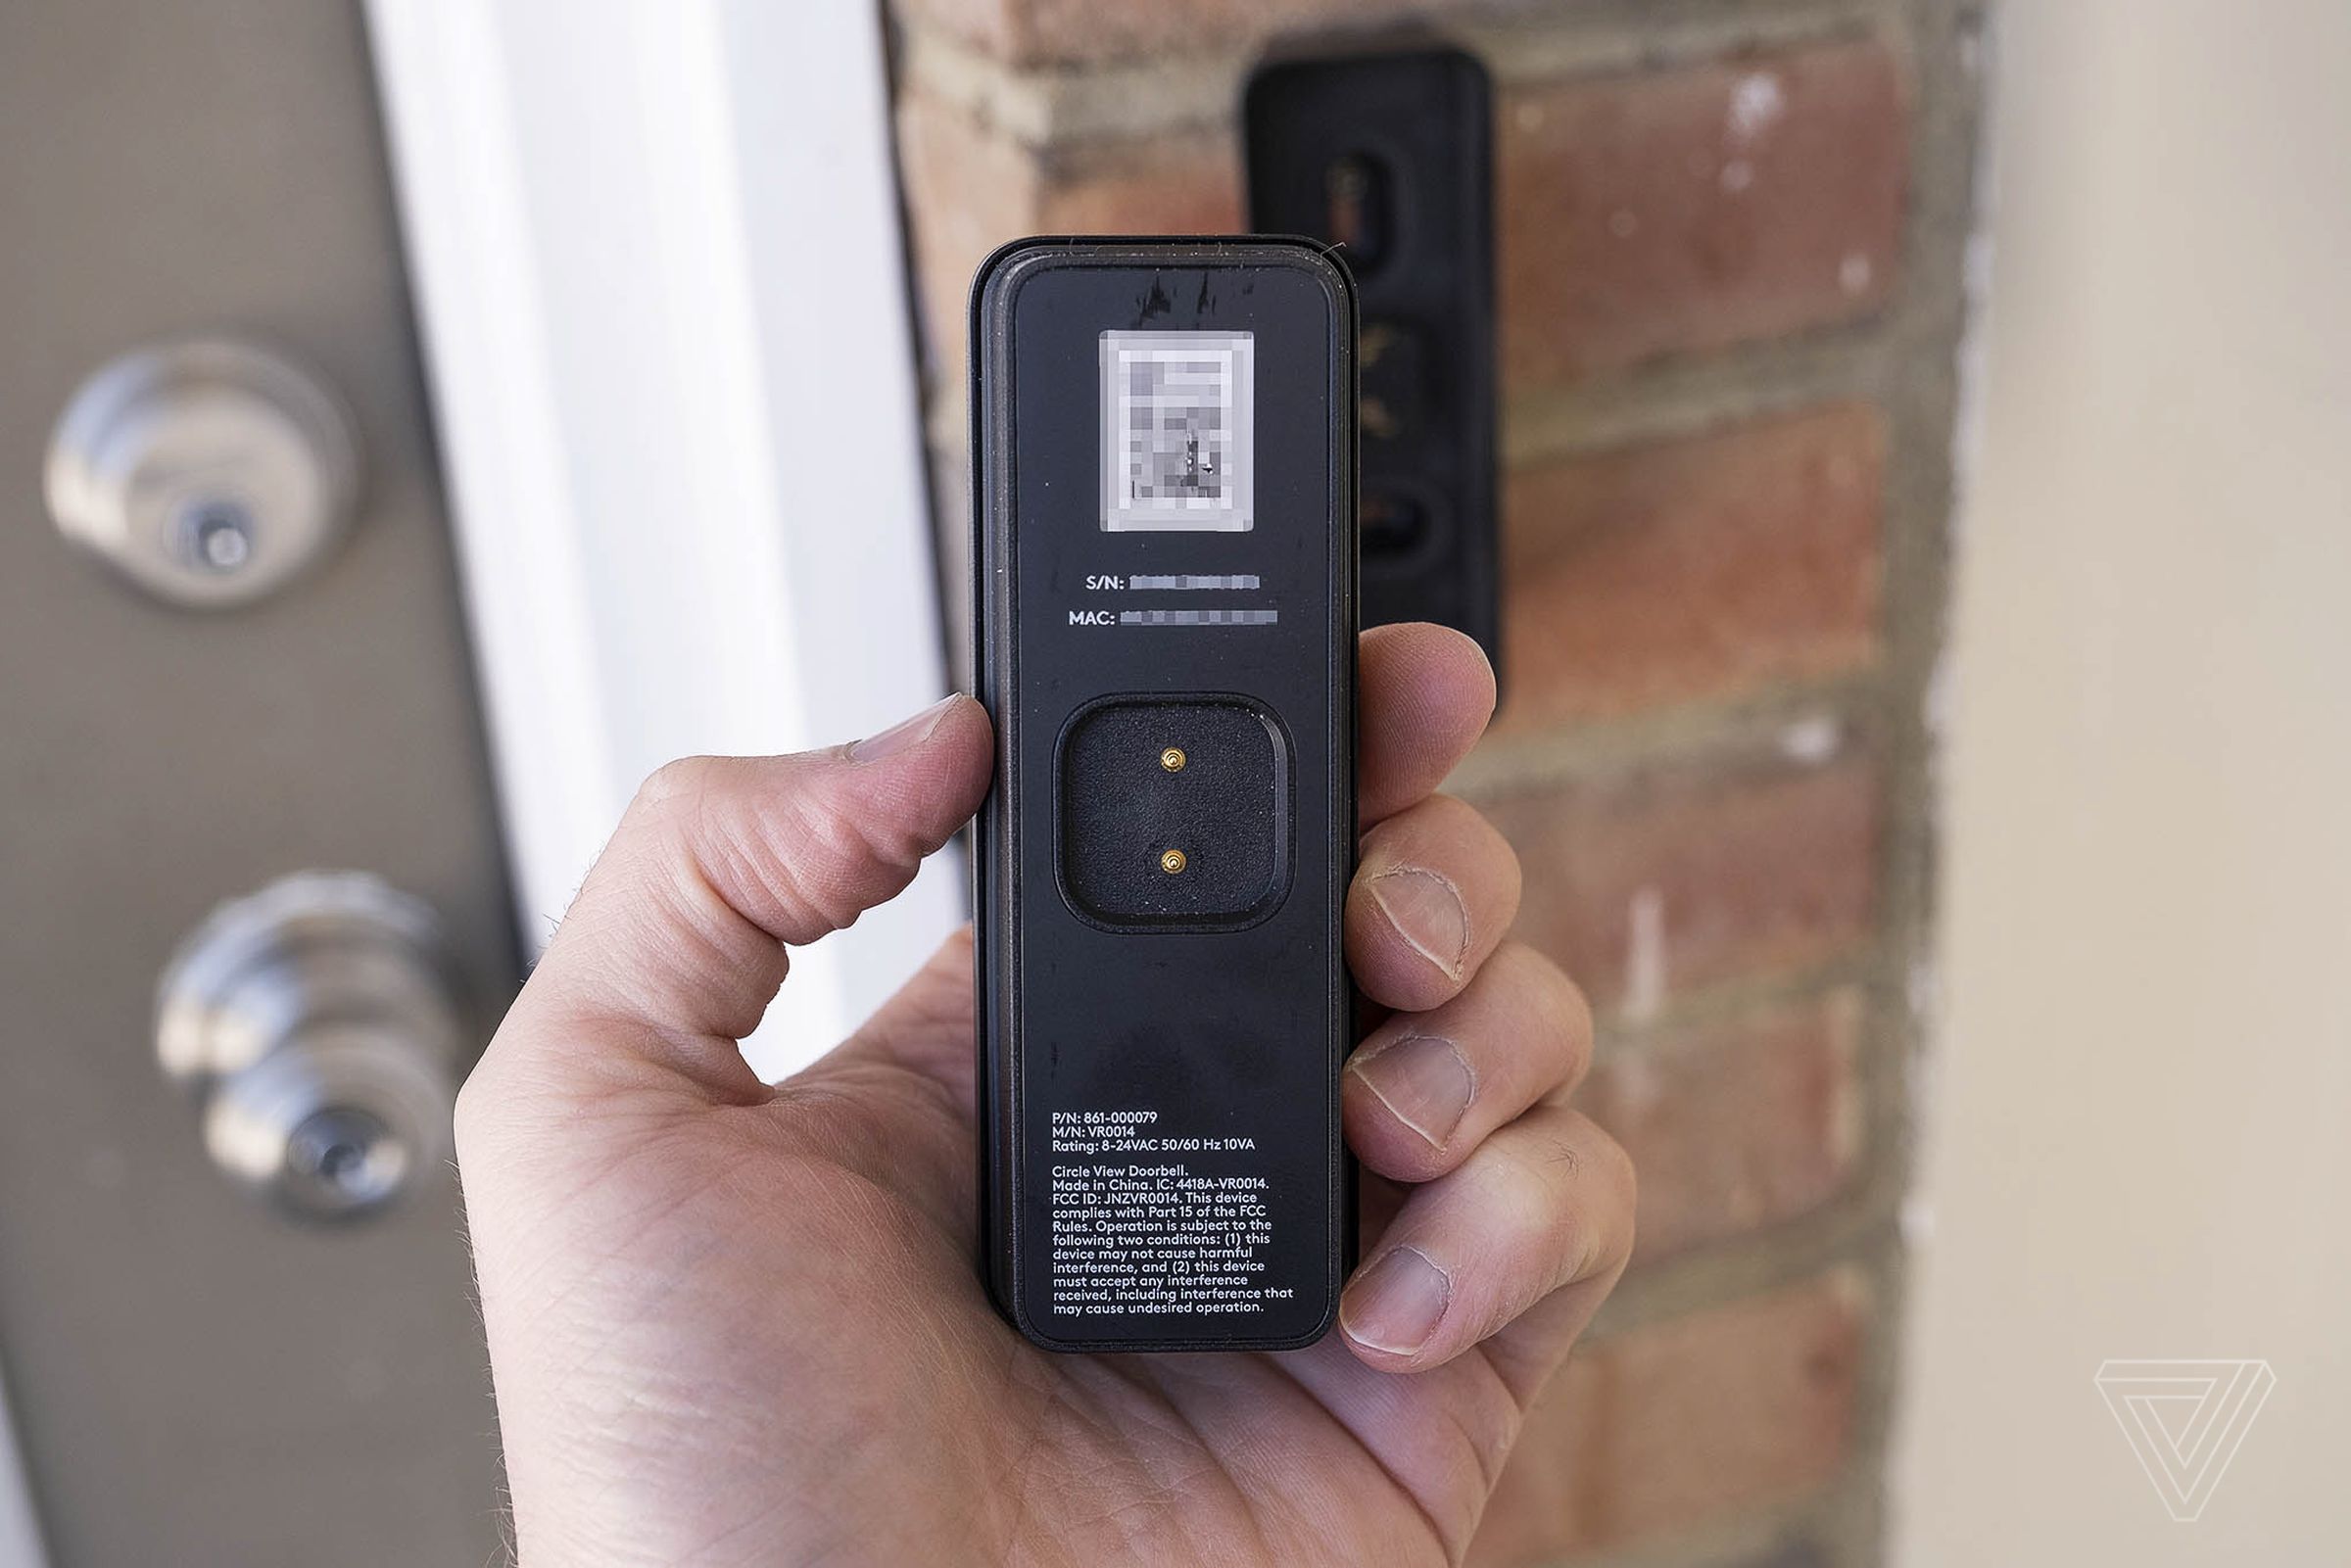 All of the setup for the Circle View Doorbell is done through Apple’s Home app on an iPhone or iPad, including scanning the barcode on the back of the unit to begin.